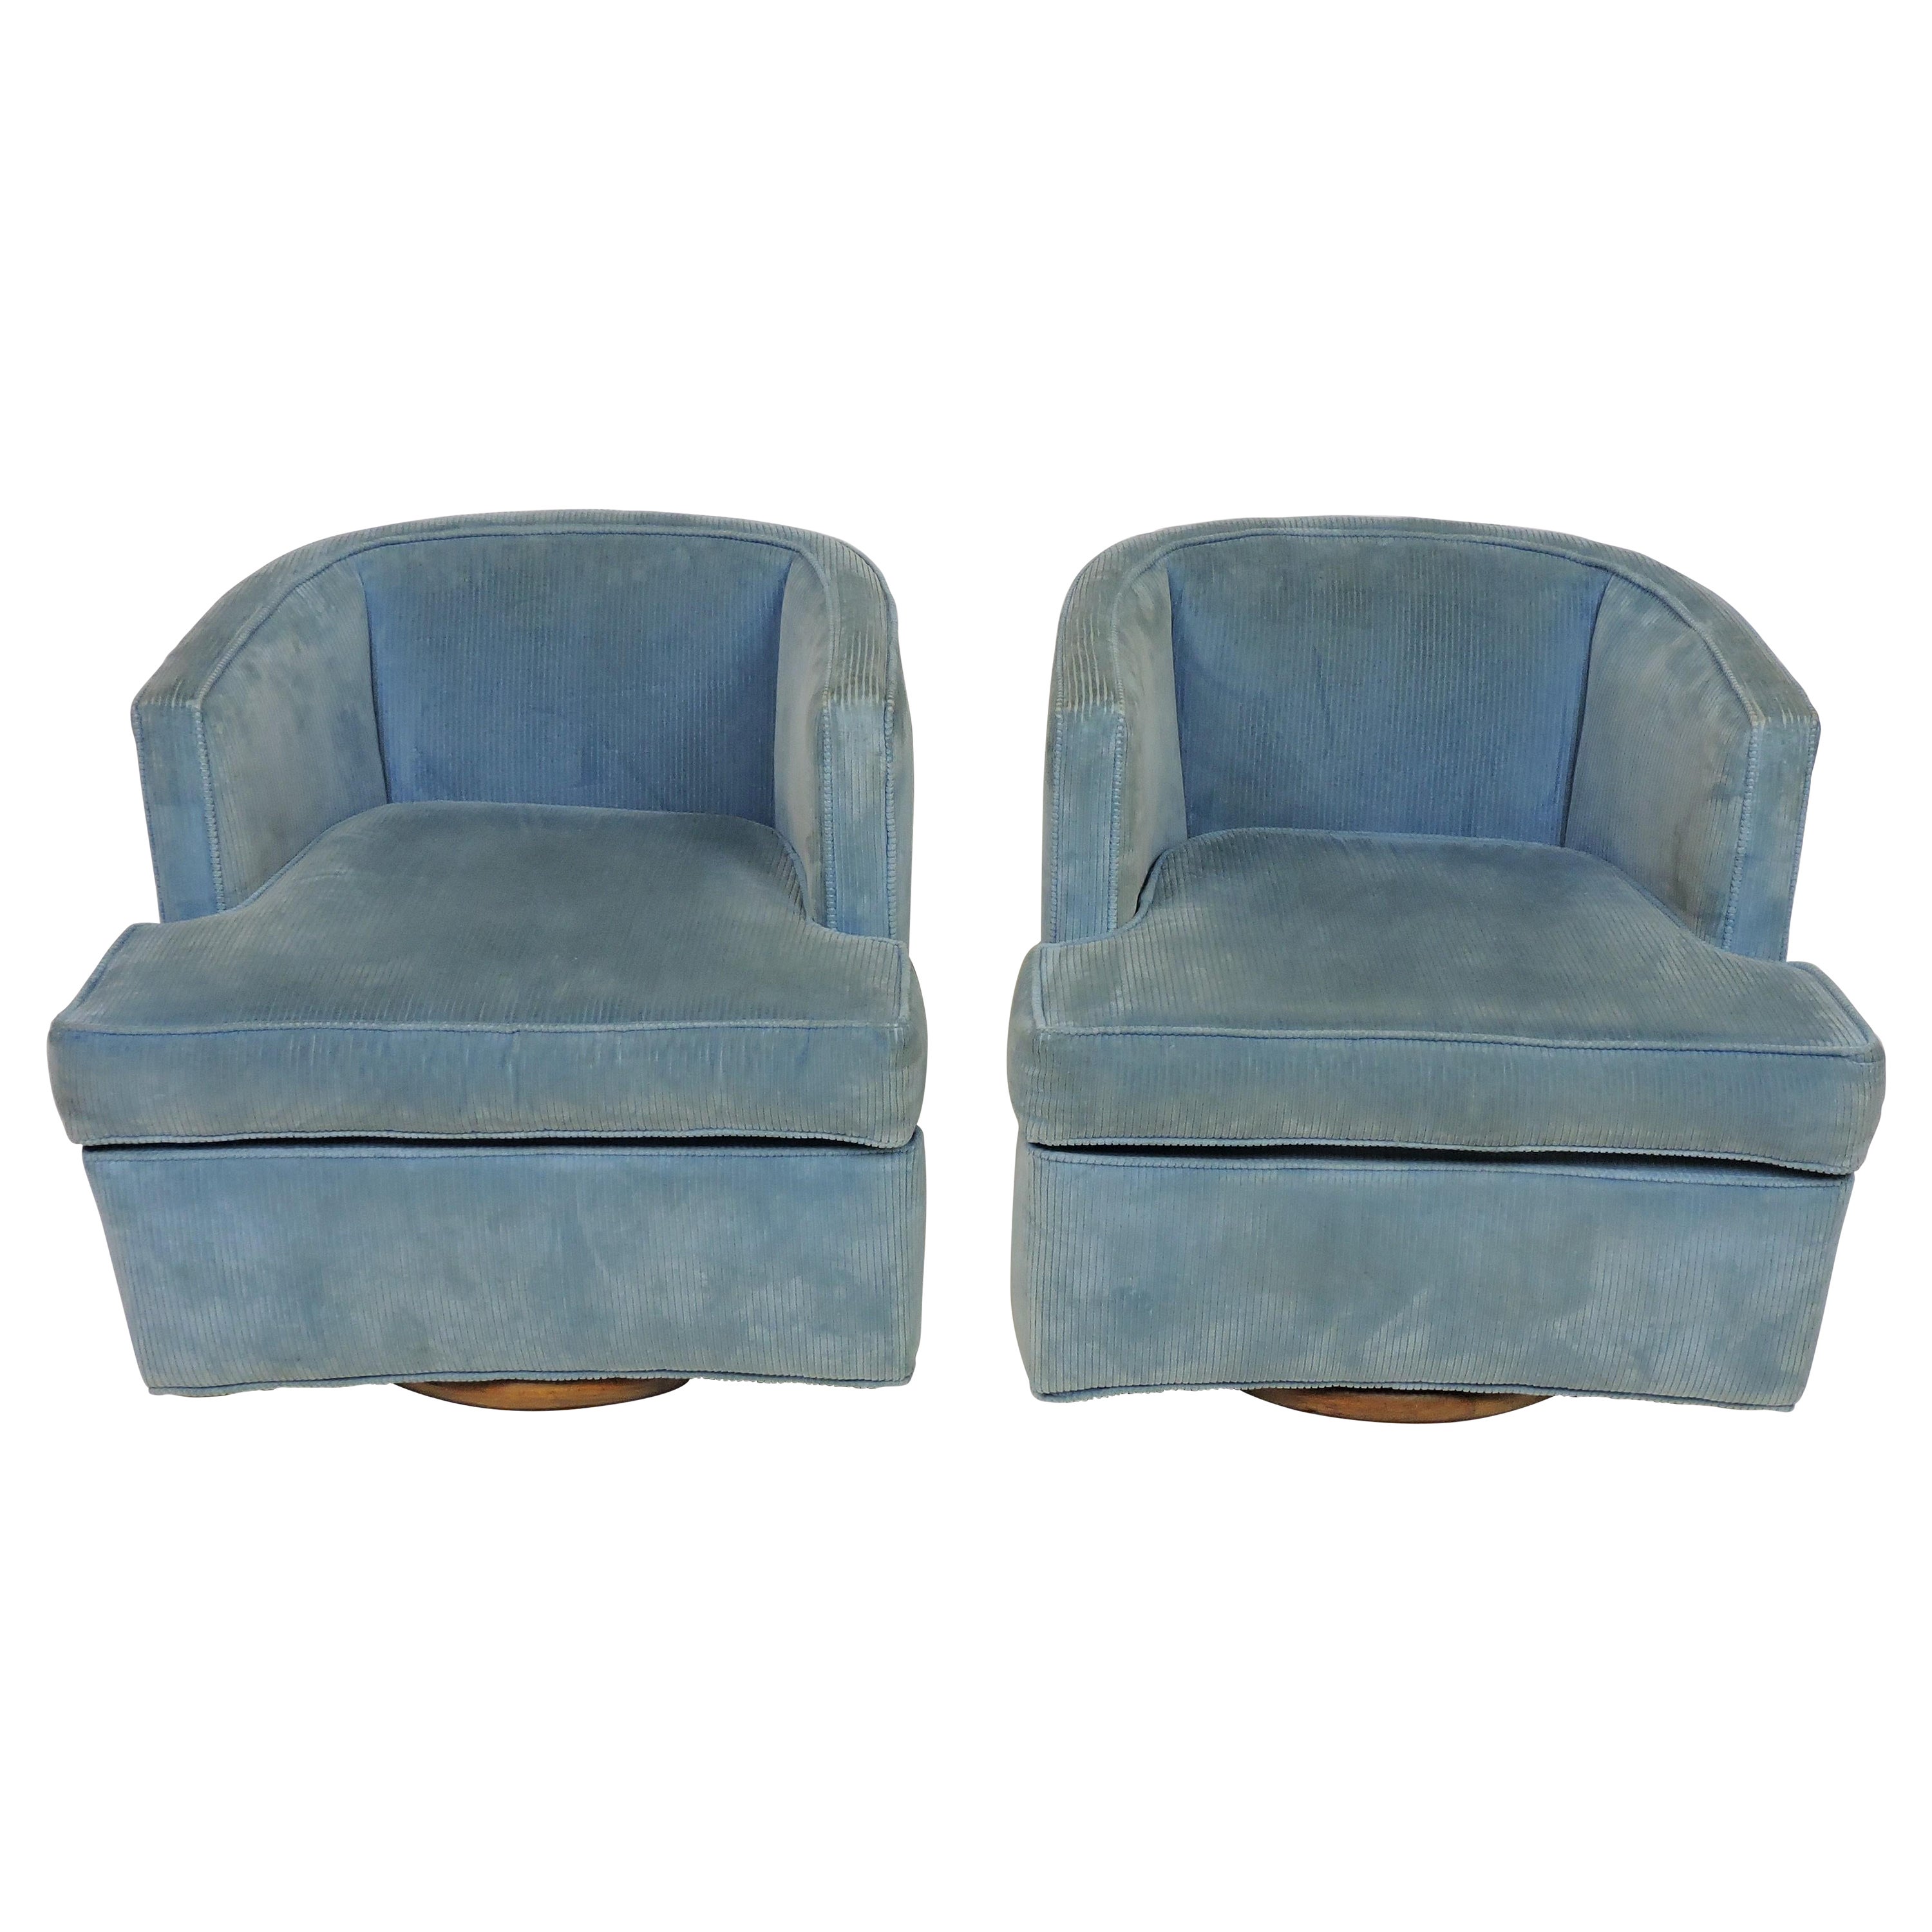 Pair of Harvey Probber Lounge Swivel Barrel Back Club Chairs with Wooden Bases